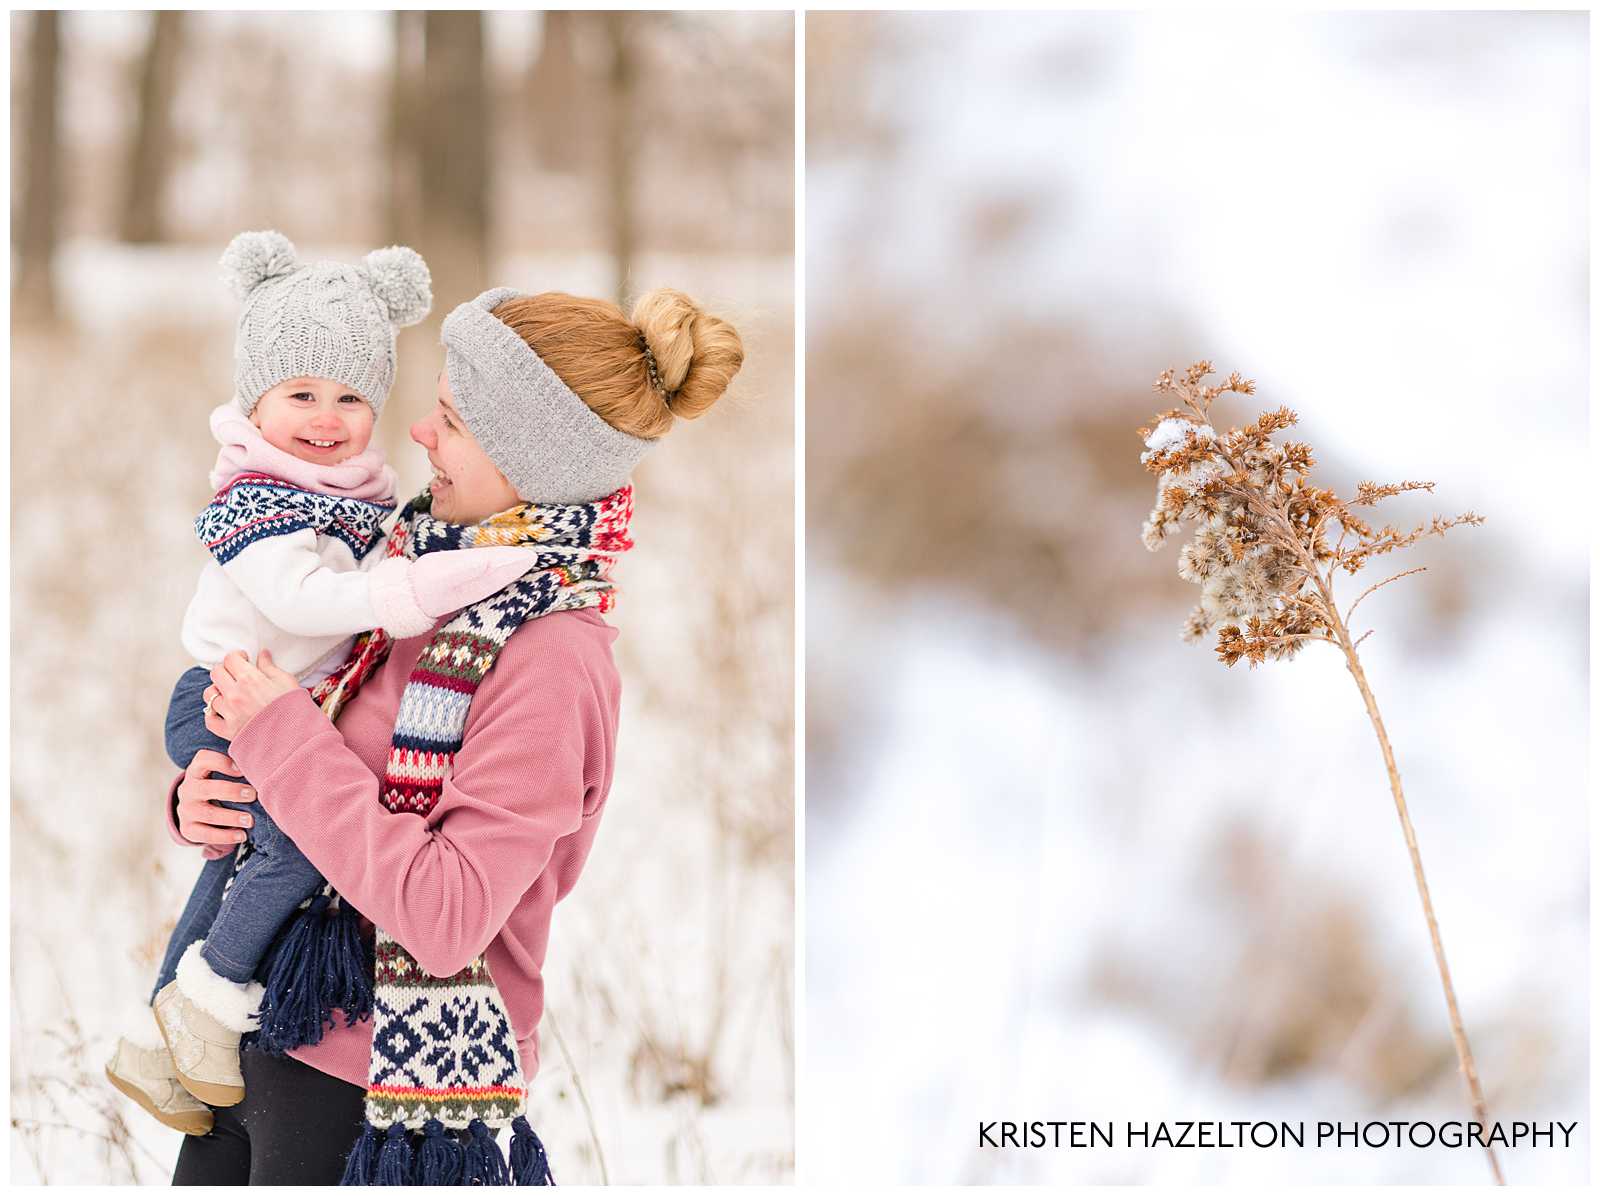 Snowy photos in the Oak Park IL area of a mom and toddler daughter